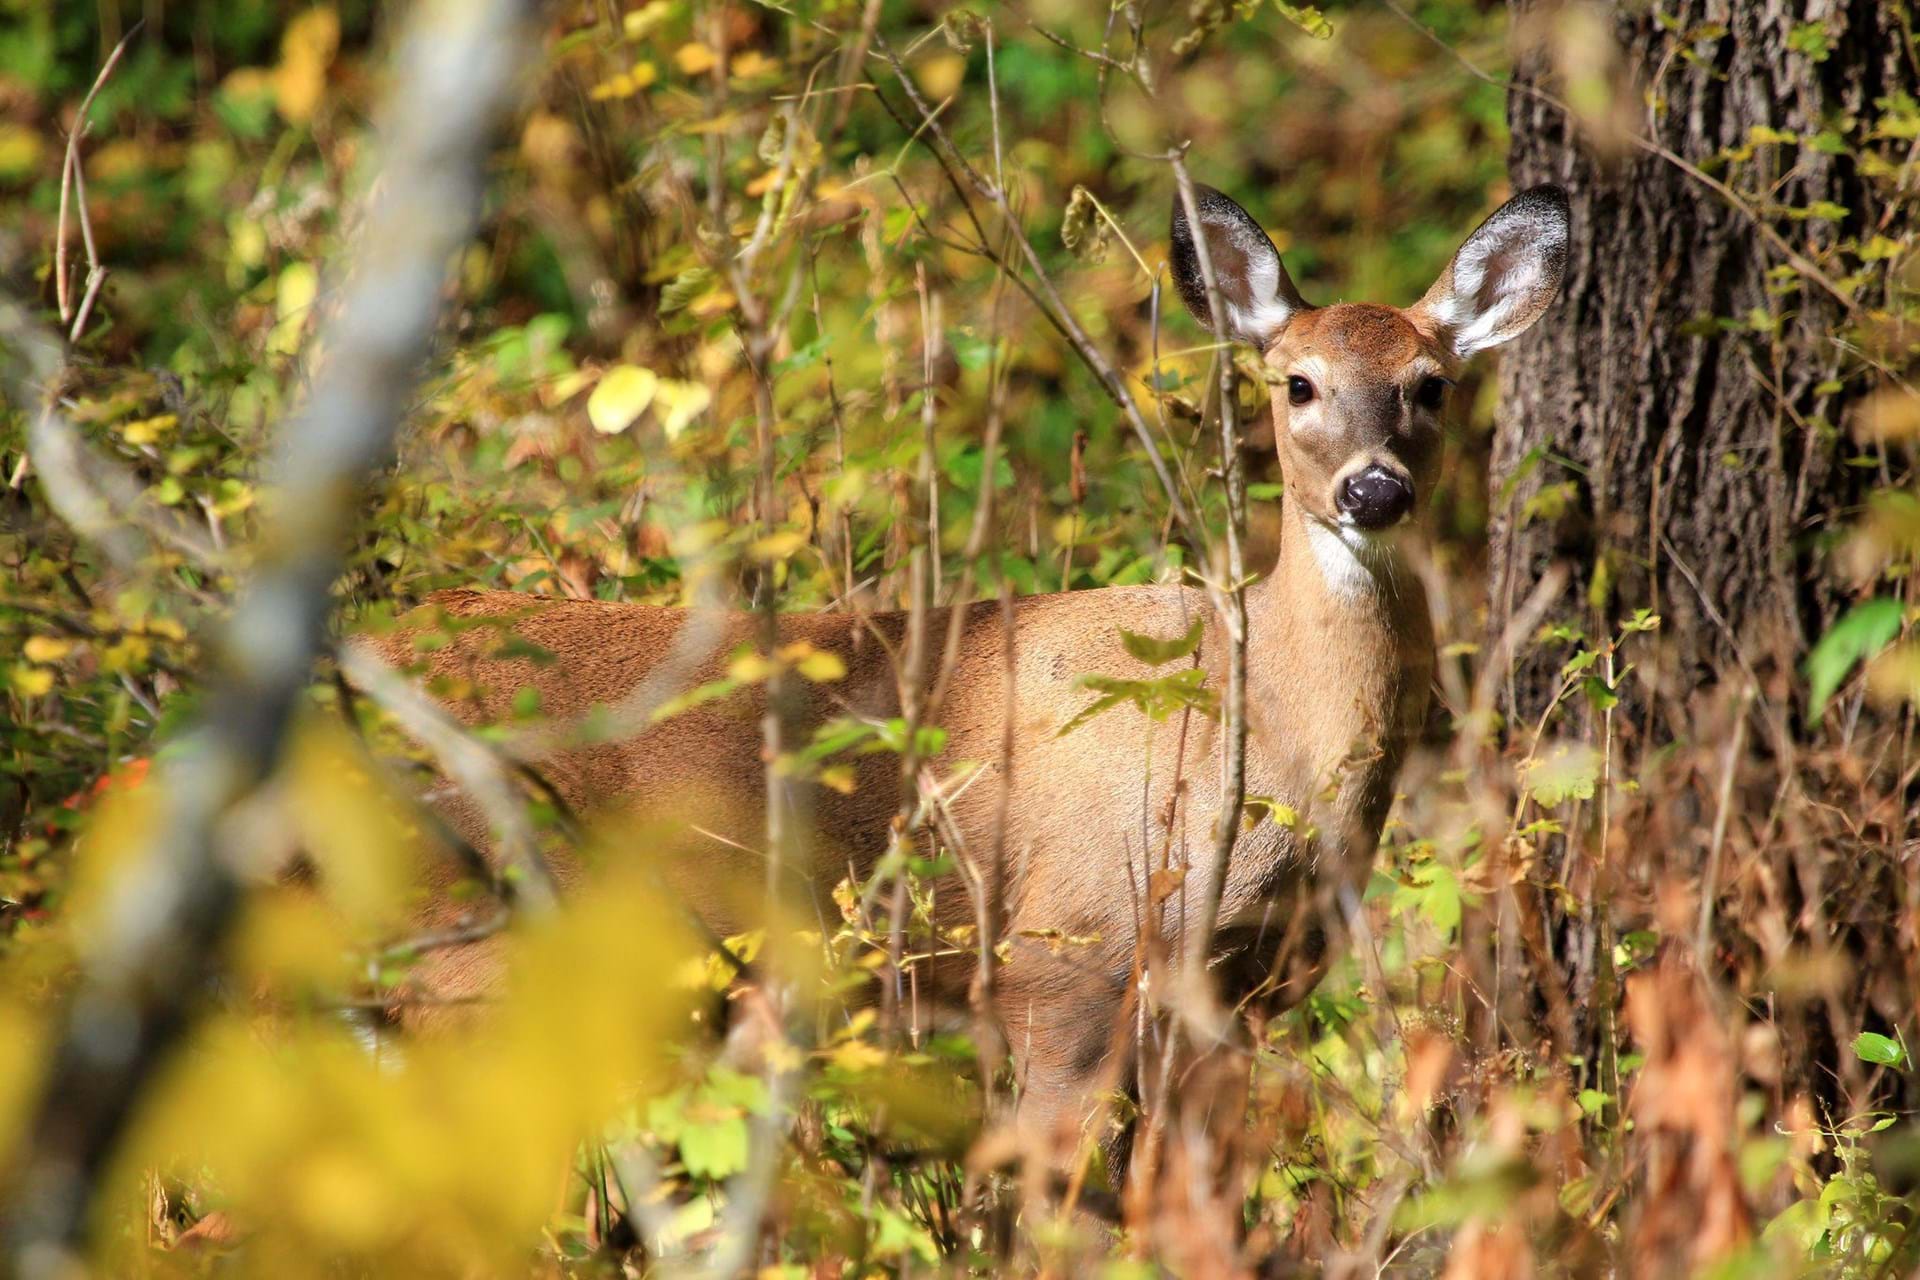 A deer looks at the camera through underbrush